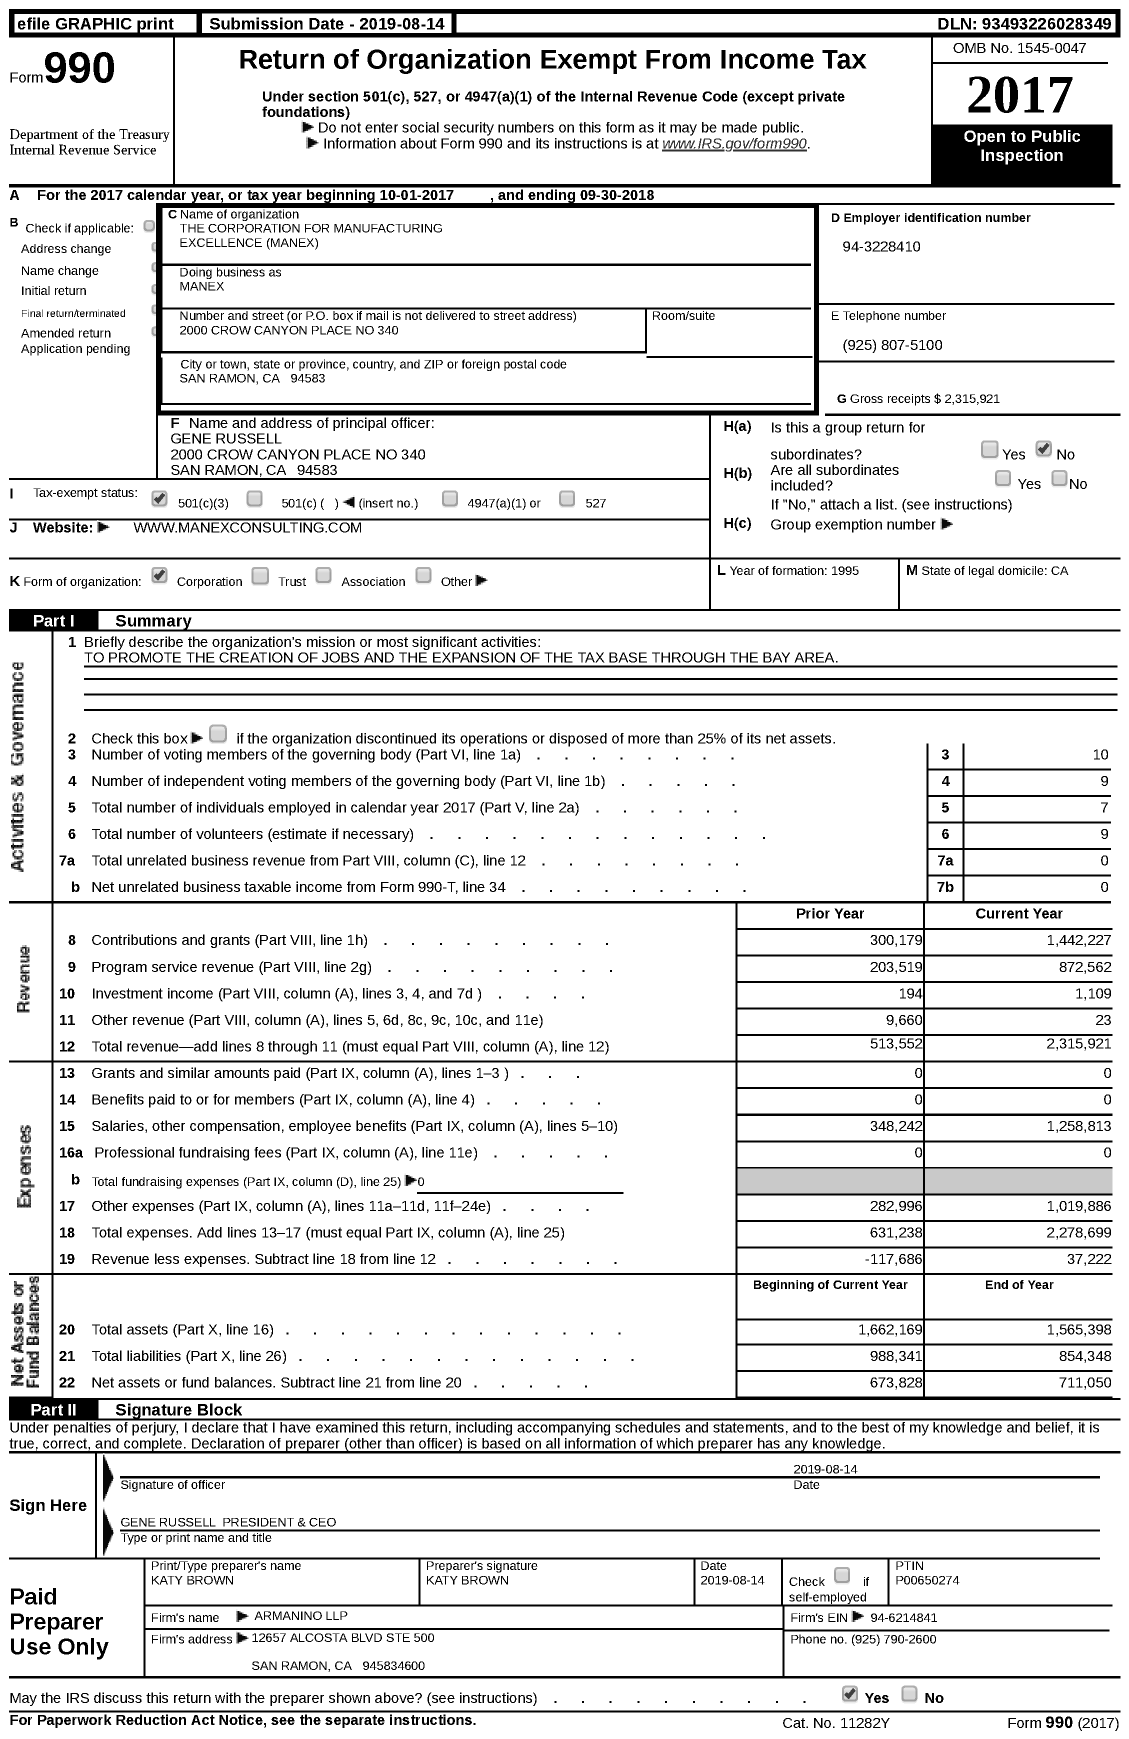 Image of first page of 2017 Form 990 for The Corporation for Manufacturing Excellence Manex (Manex)